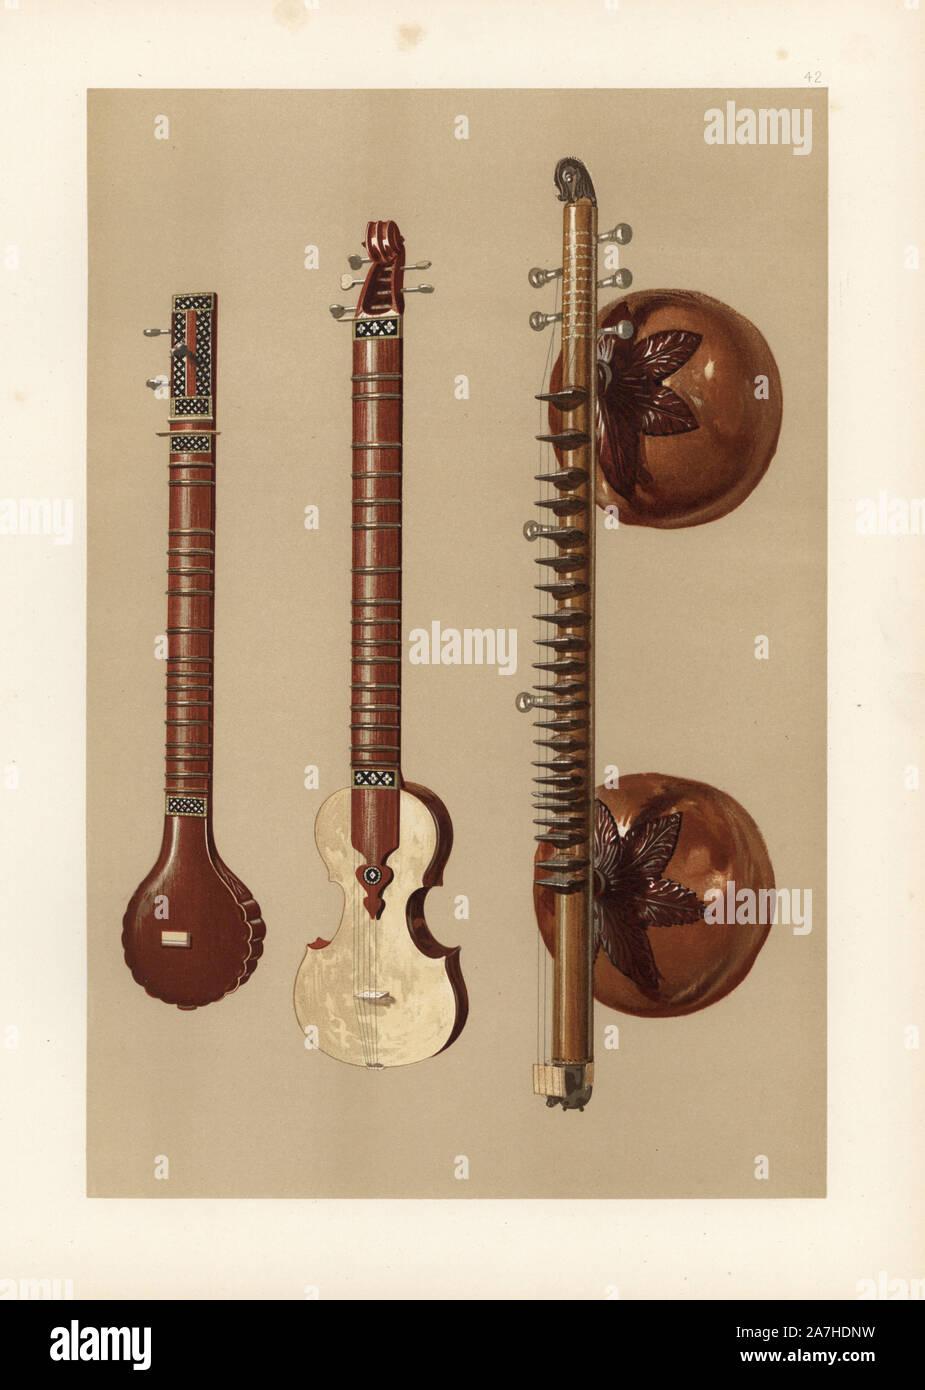 Indian sitars and a vina with large soundboxes. Chromolithograph from an illustration by William Gibb from A.J. Hipkins' 'Musical Instruments, Historic, Rare and Unique,' Adam and Charles Black, Edinburgh, 1888. Alfred James Hipkins (1826-1903) was an English musicologist who specialized in the history of the pianoforte and other instruments. William Gibb was a master illustrator and chromolithographer and illustrated 'The Royal House of Stuart' (1890), 'Naval and Military Trophies' (1896), and others. Stock Photo